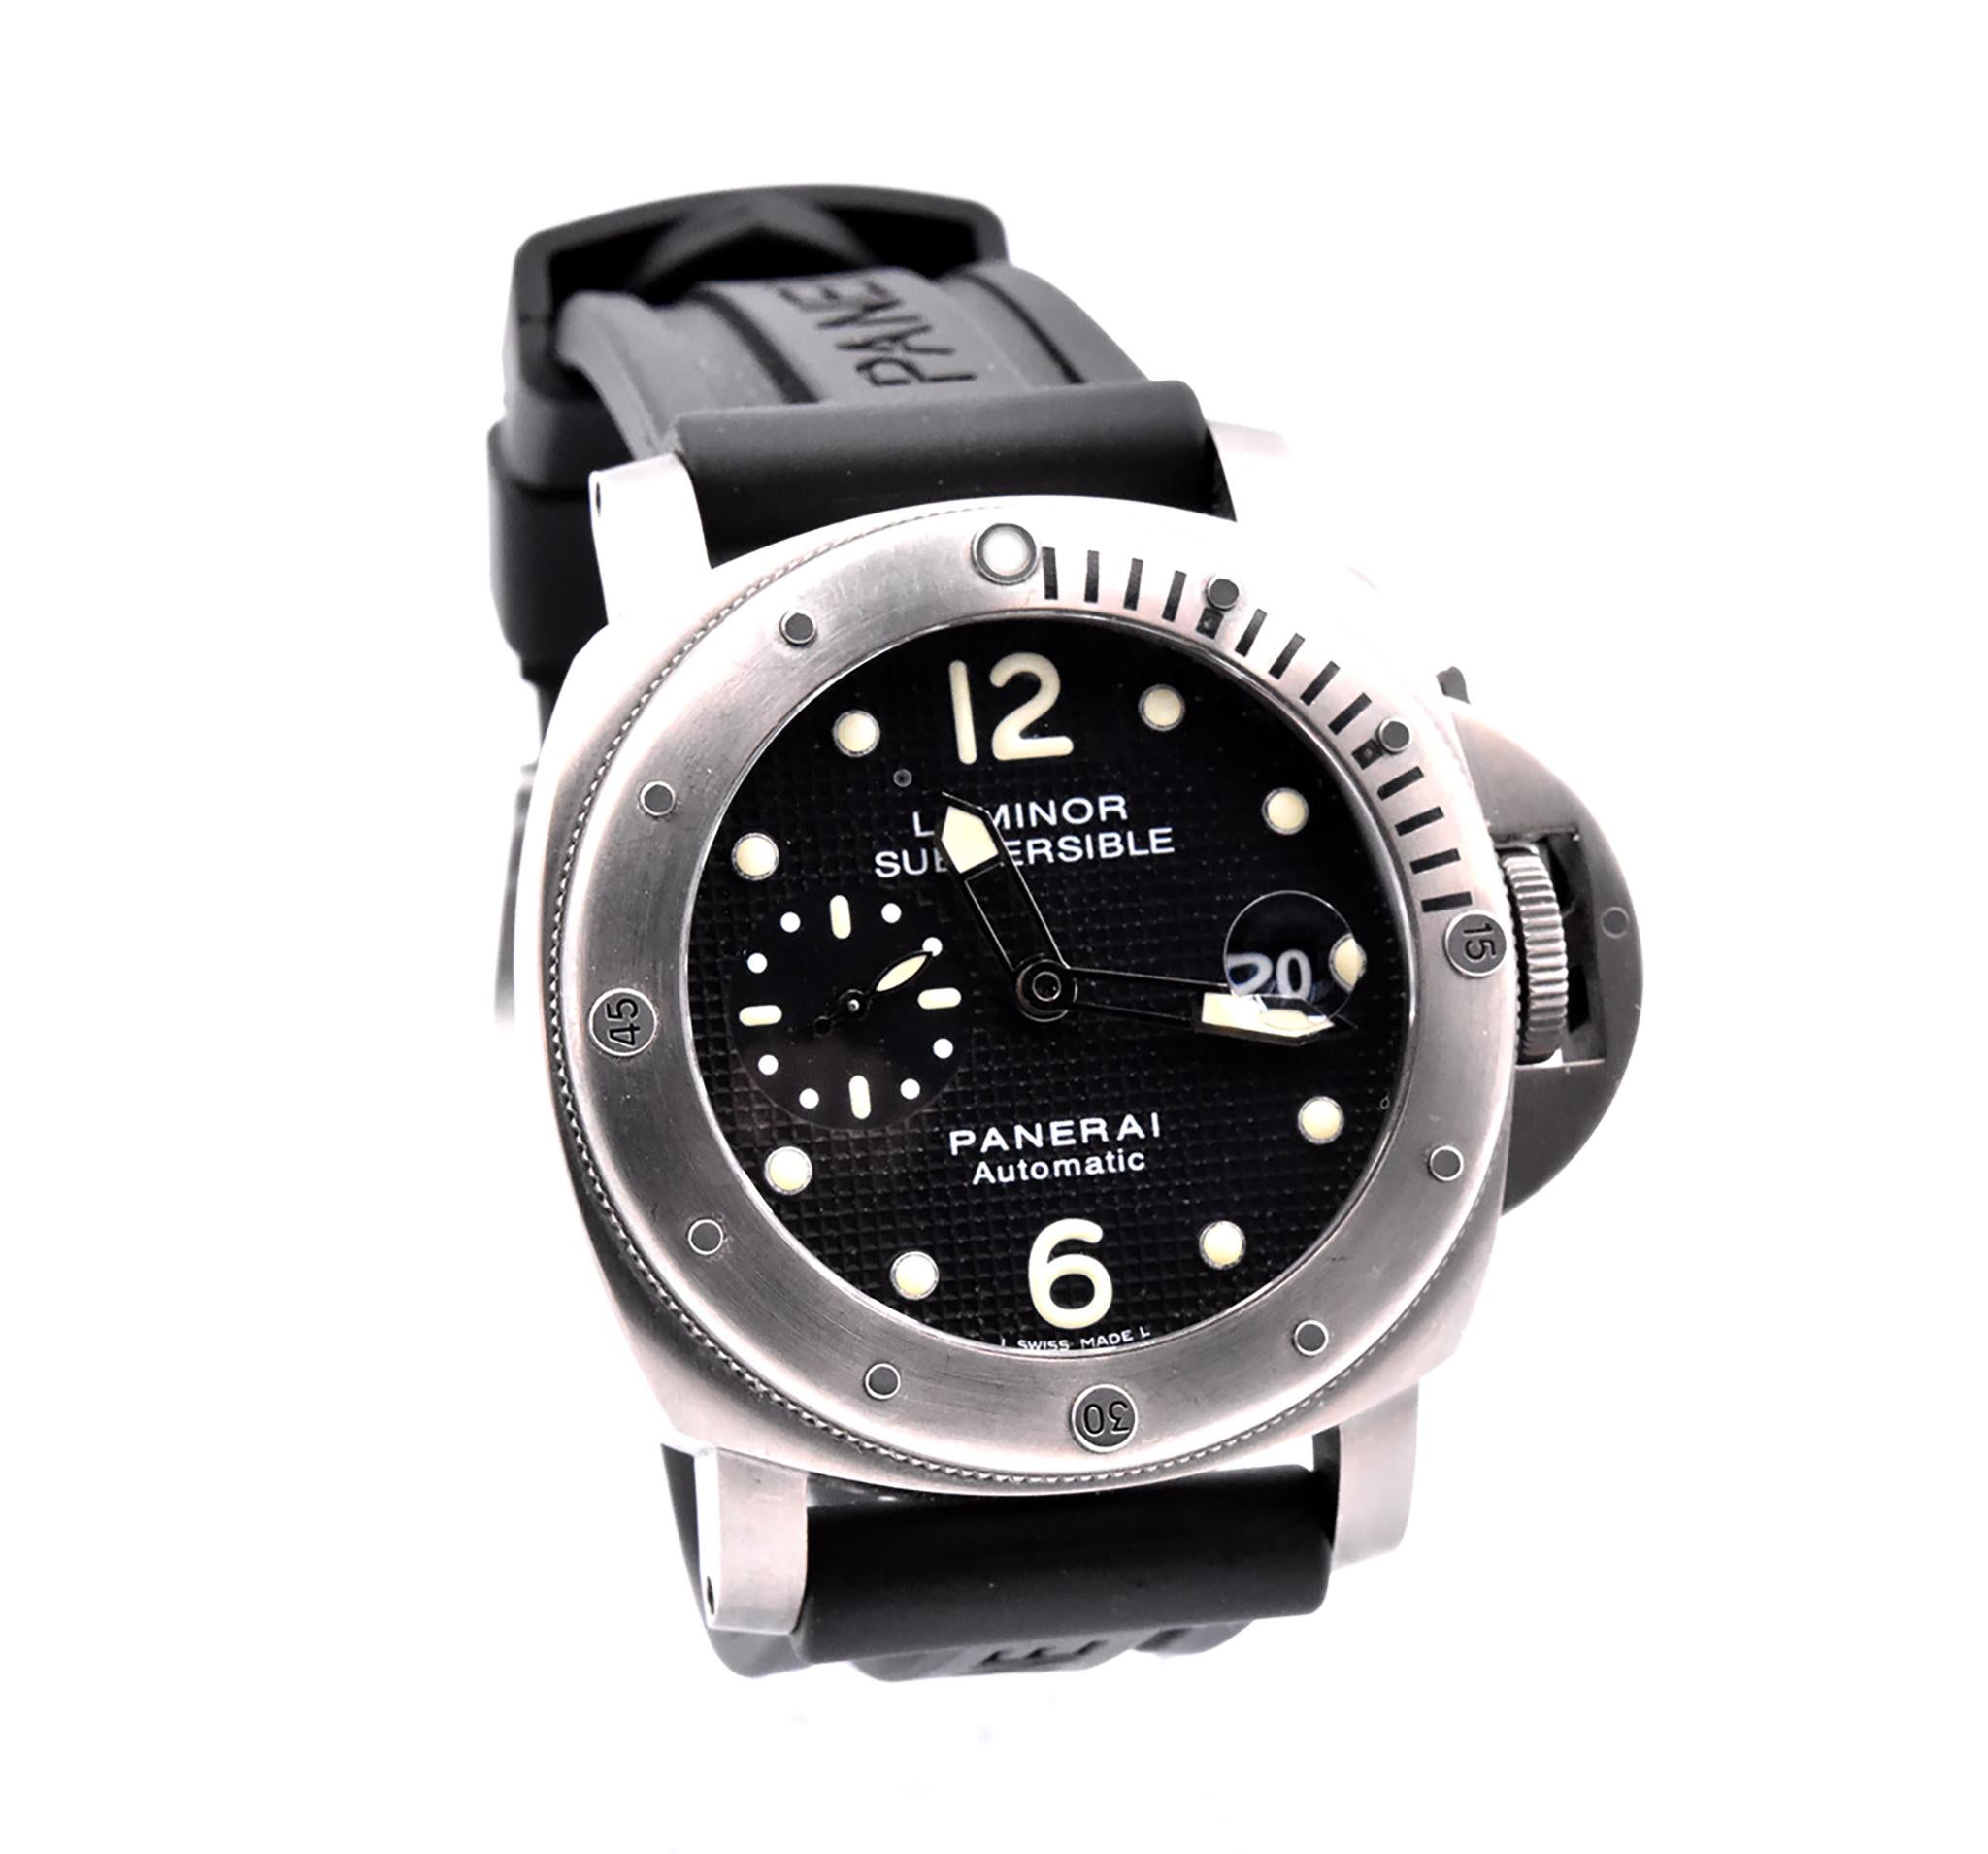 Movement: automatic
Function: Hours, minutes, seconds, date
Case: 44mm titanium case, sapphire crystal, smooth bezel, push-pull crown
Band: black Officine Panerai rubber strap with buckle
Dial: black luminesce dial
Reference: PAM 25
Serial: